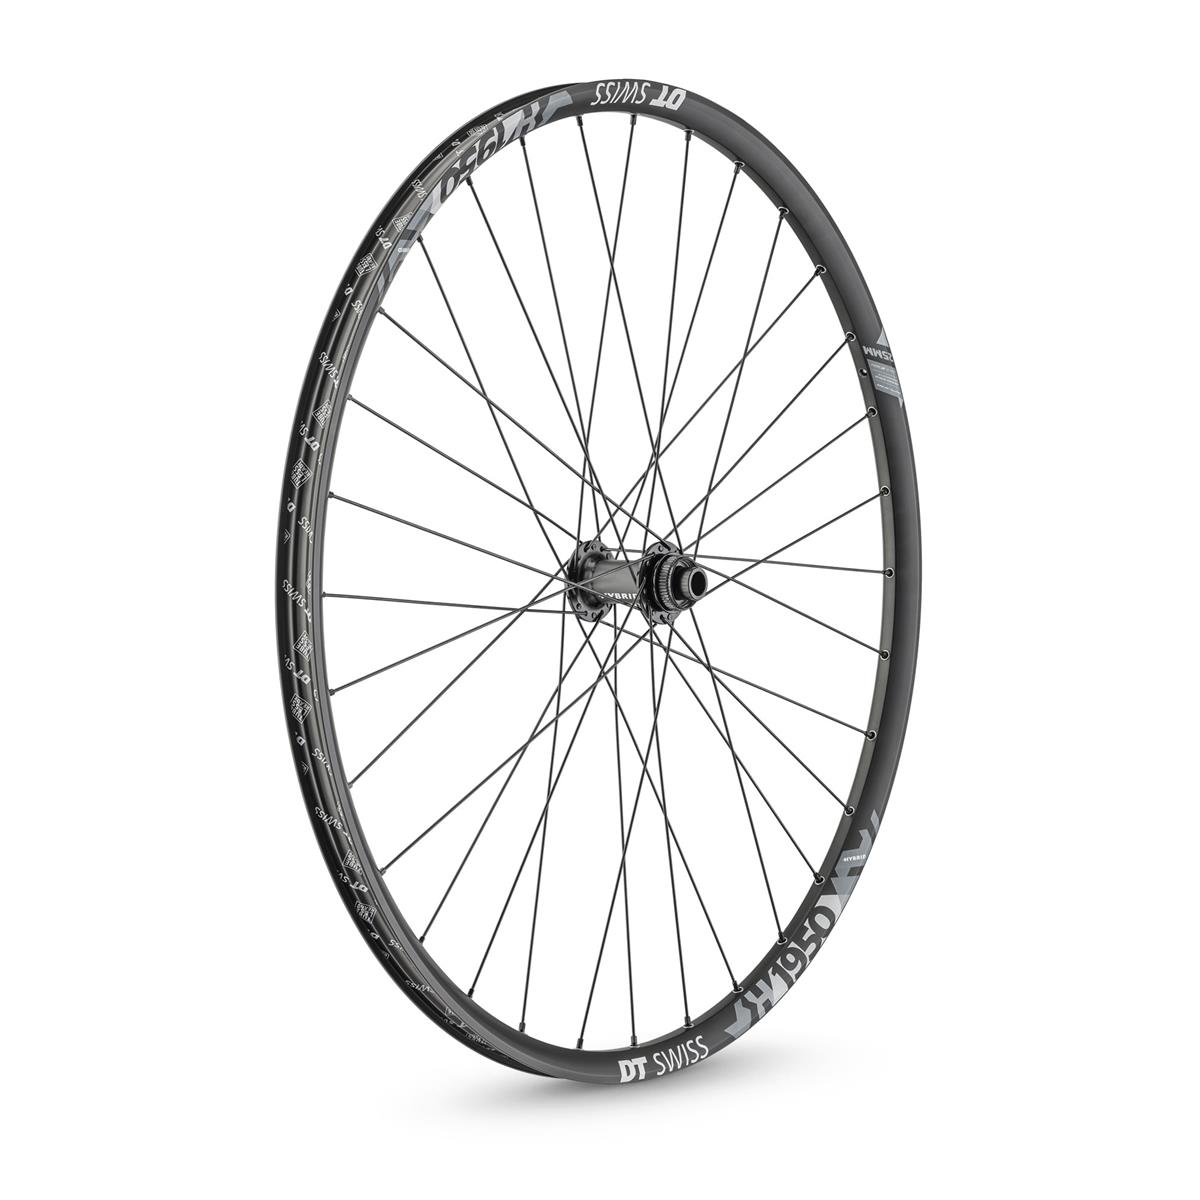 DT Swiss Wheel H 1950 Classic Front, 29 Inches, 15x100 mm TA, Boost, Center Lock, 25 mm